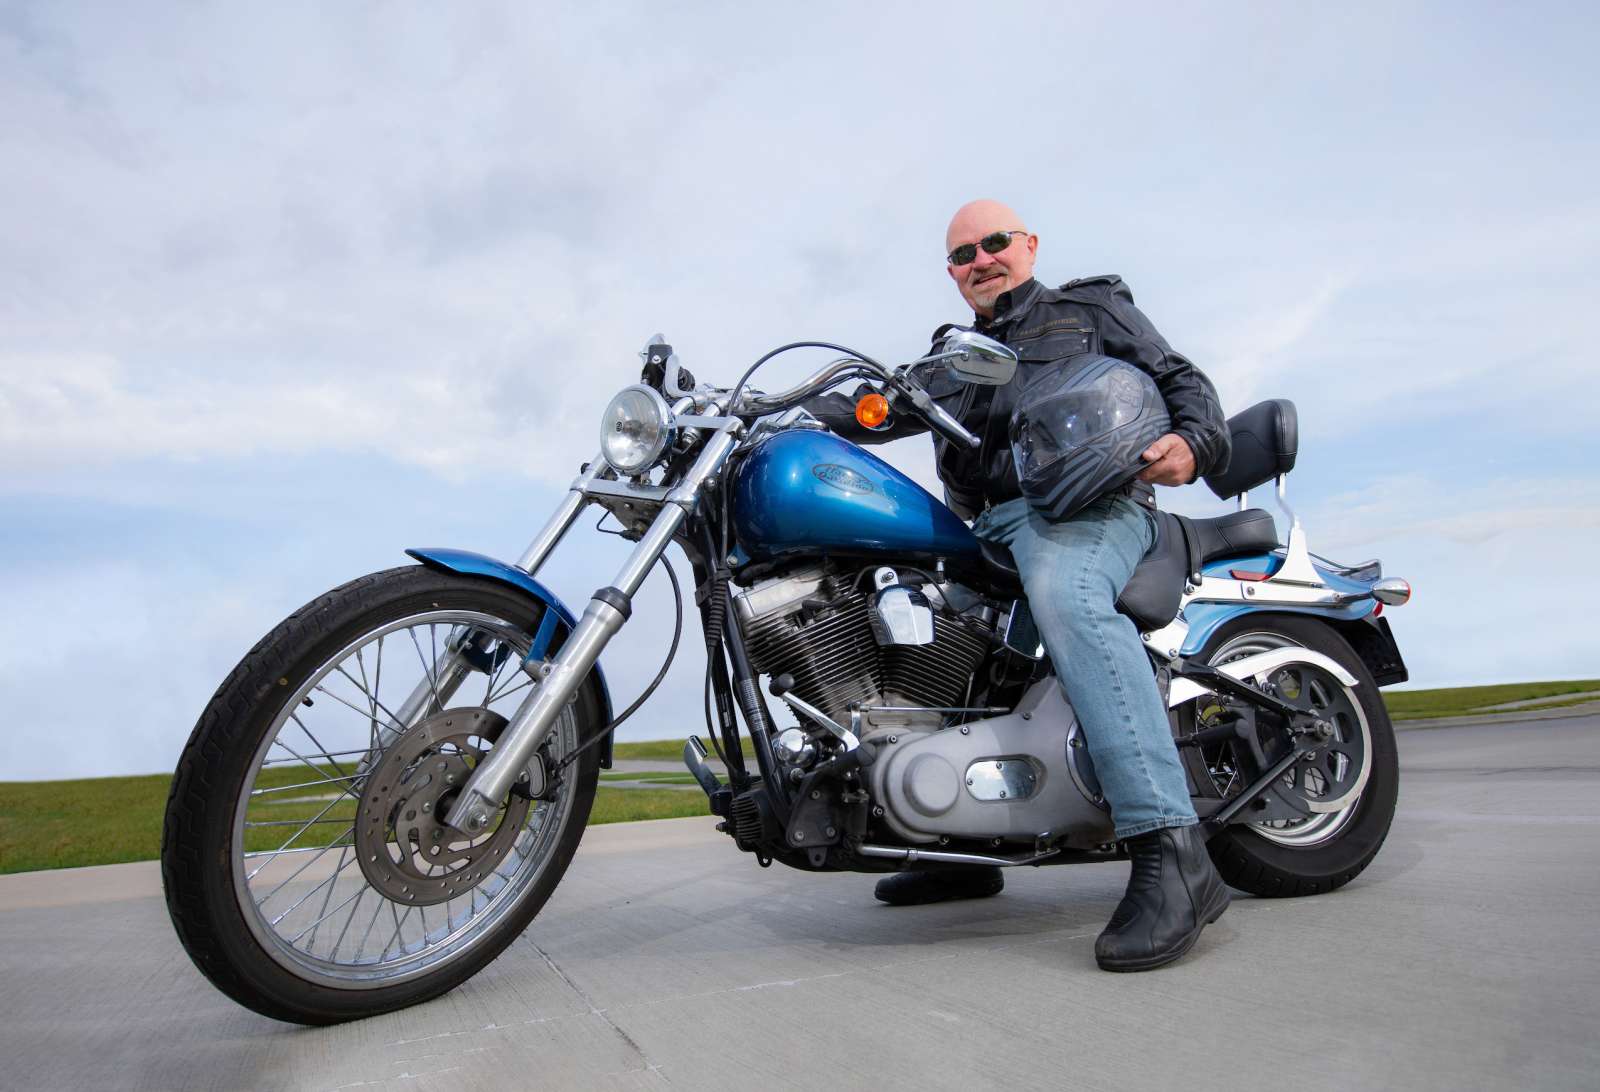 Man sits on a Harley-Davidson motorcycle holding a helmet